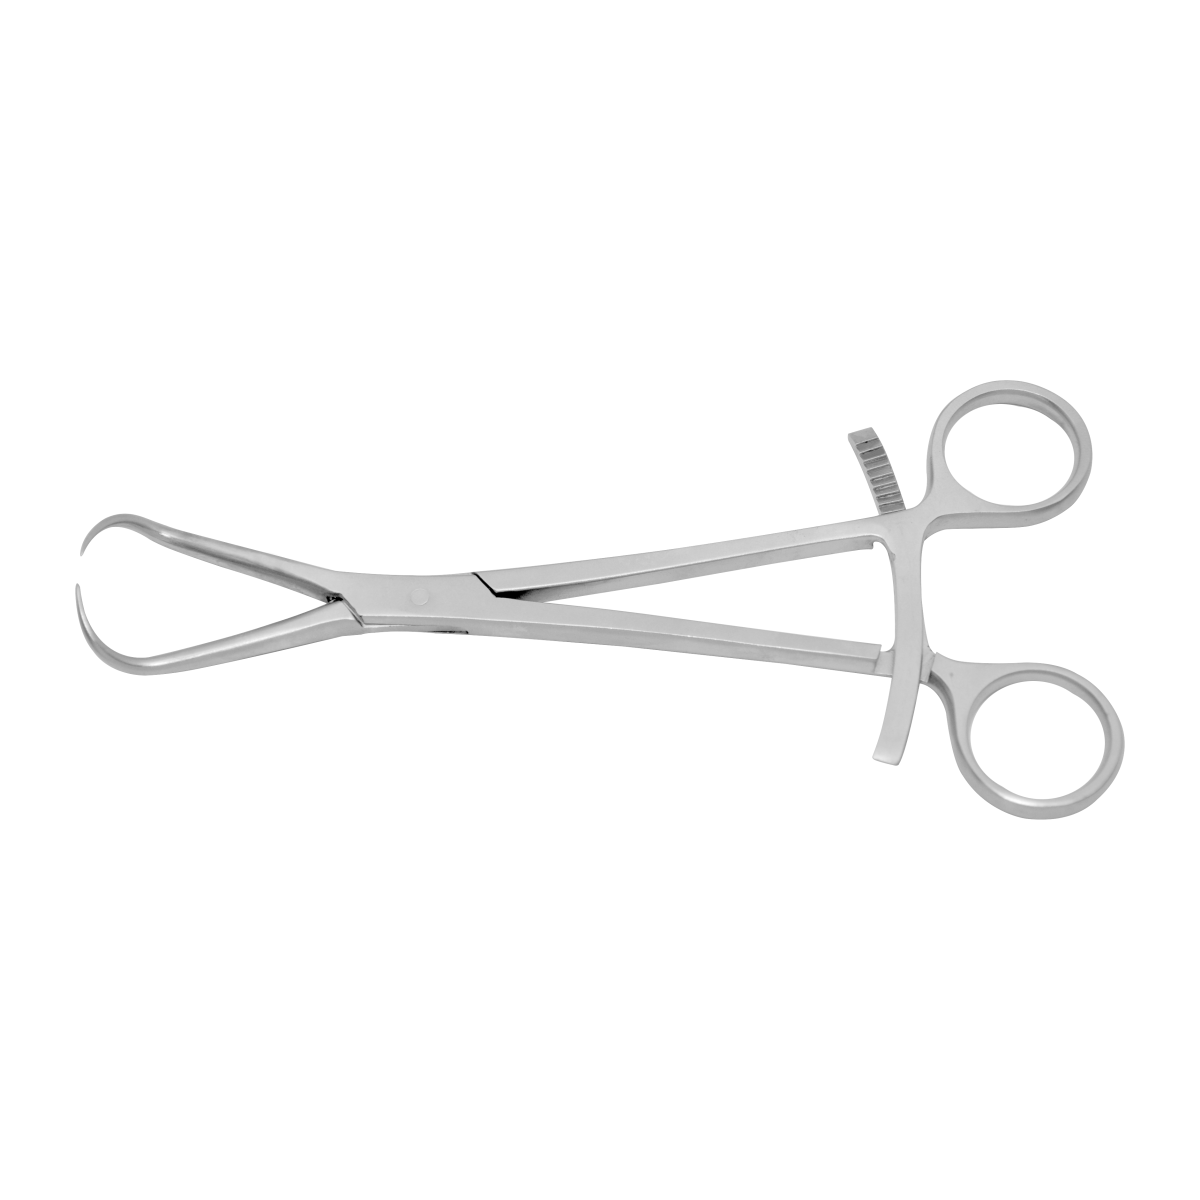 Reduction-Forceps-Pointed-Ratchet-Lock-180mm